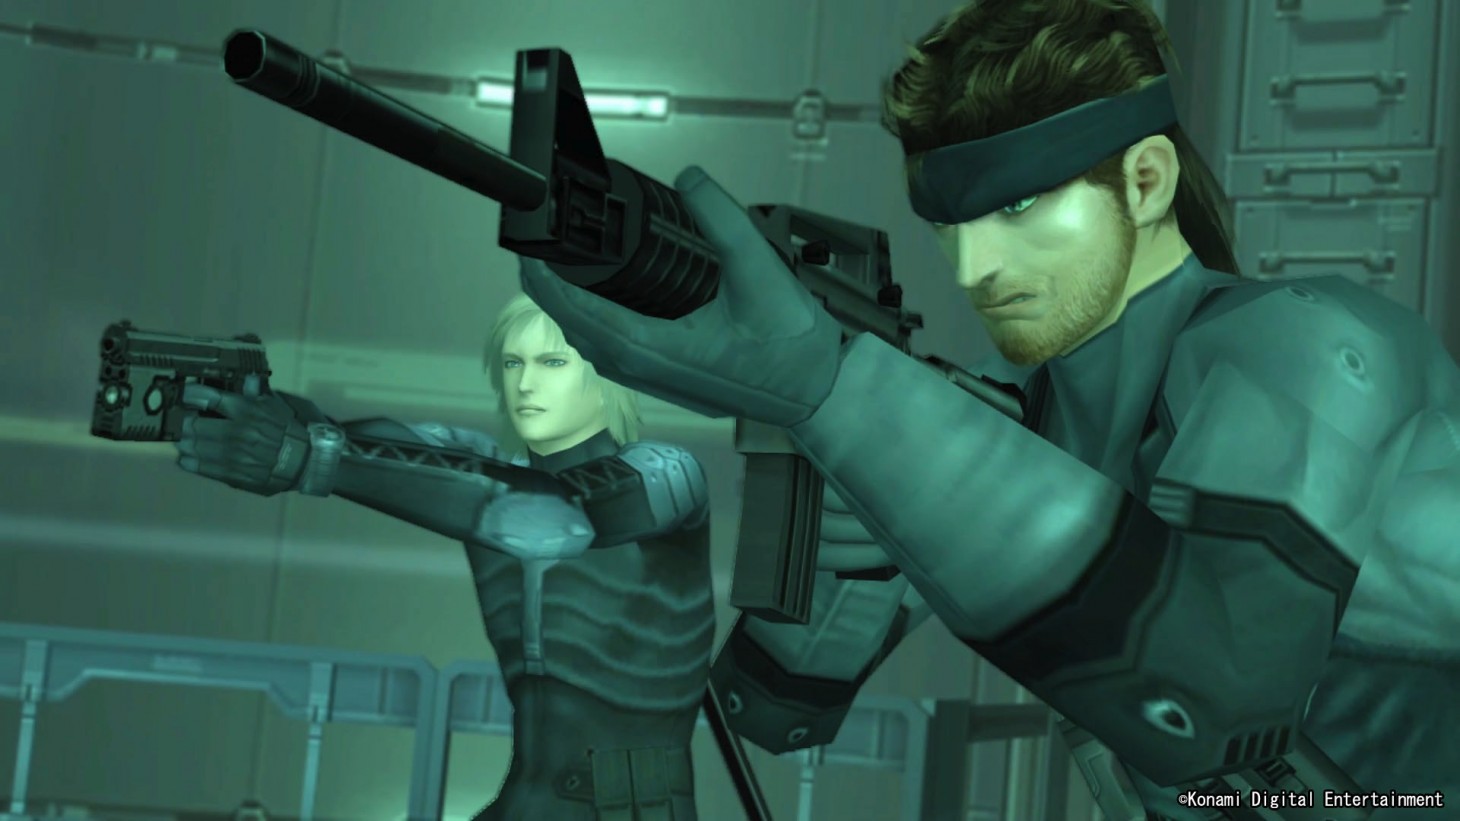 METAL GEAR SOLID: MASTER COLLECTION Vol. 1 will Launch on October 24th for  Nintendo Switch™, PlayStation®5, Xbox Series X, S, and Steam®